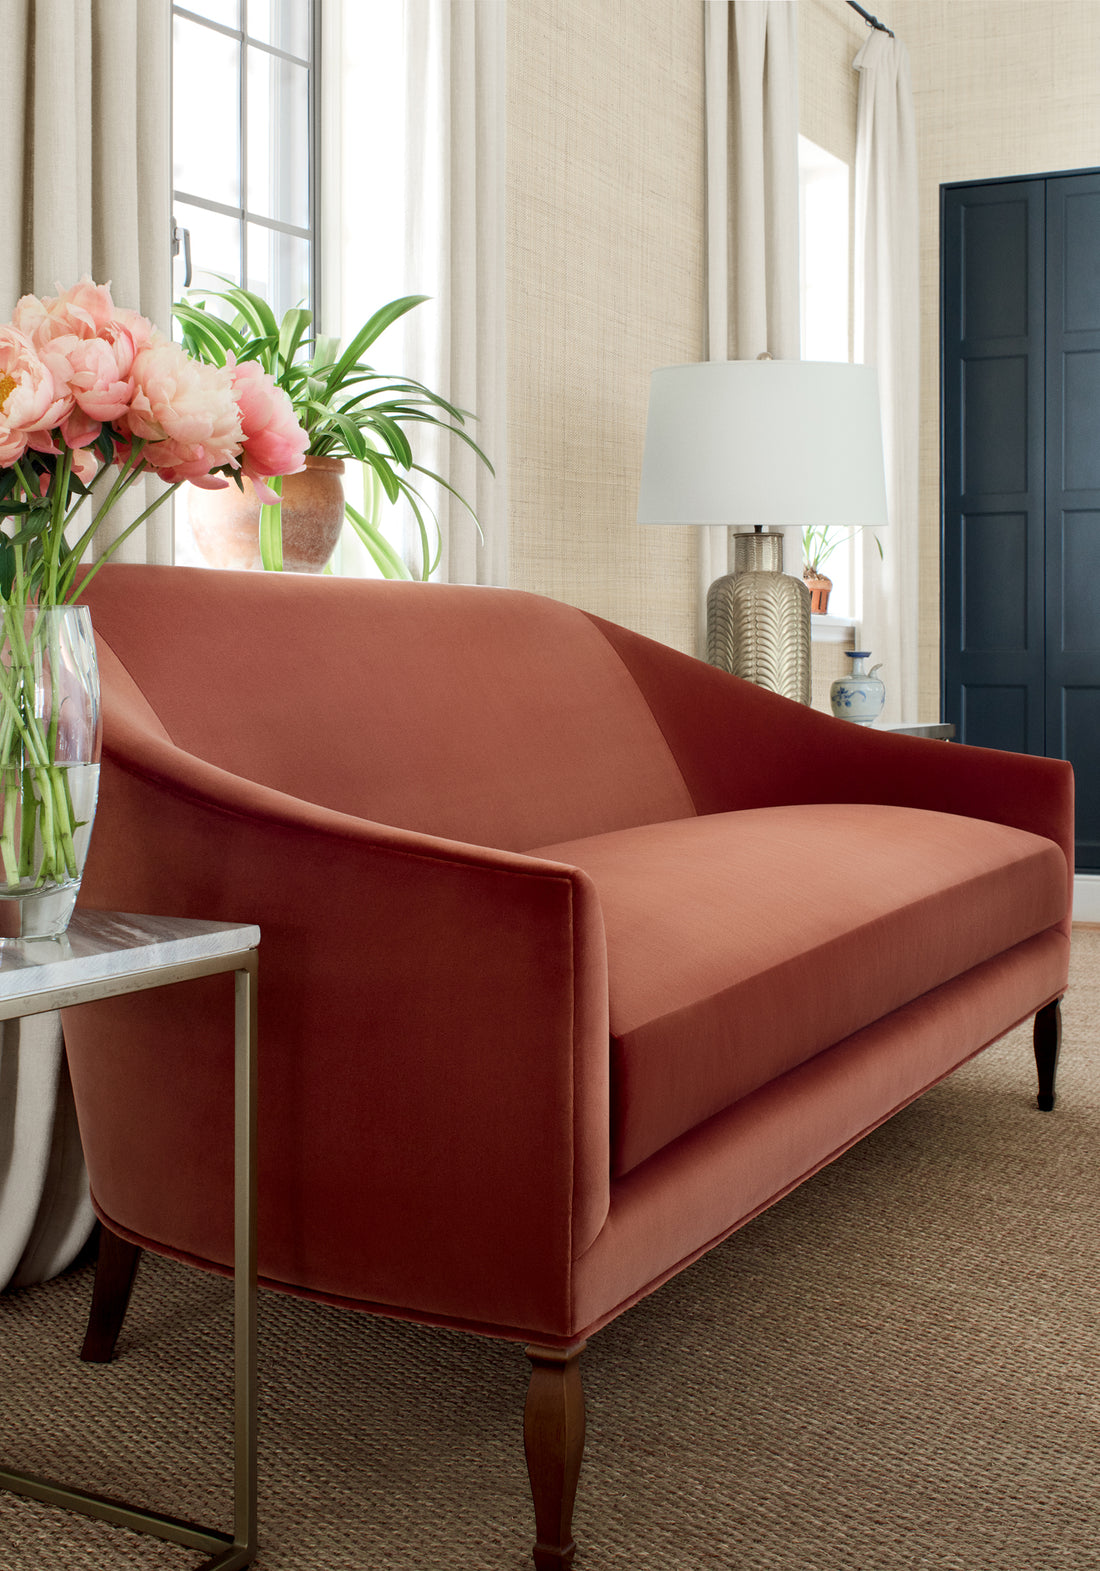 Sofa in Lyra Velvet fabric in copper color - pattern number W8904 - by Thibaut in the Lyra Velvets collection